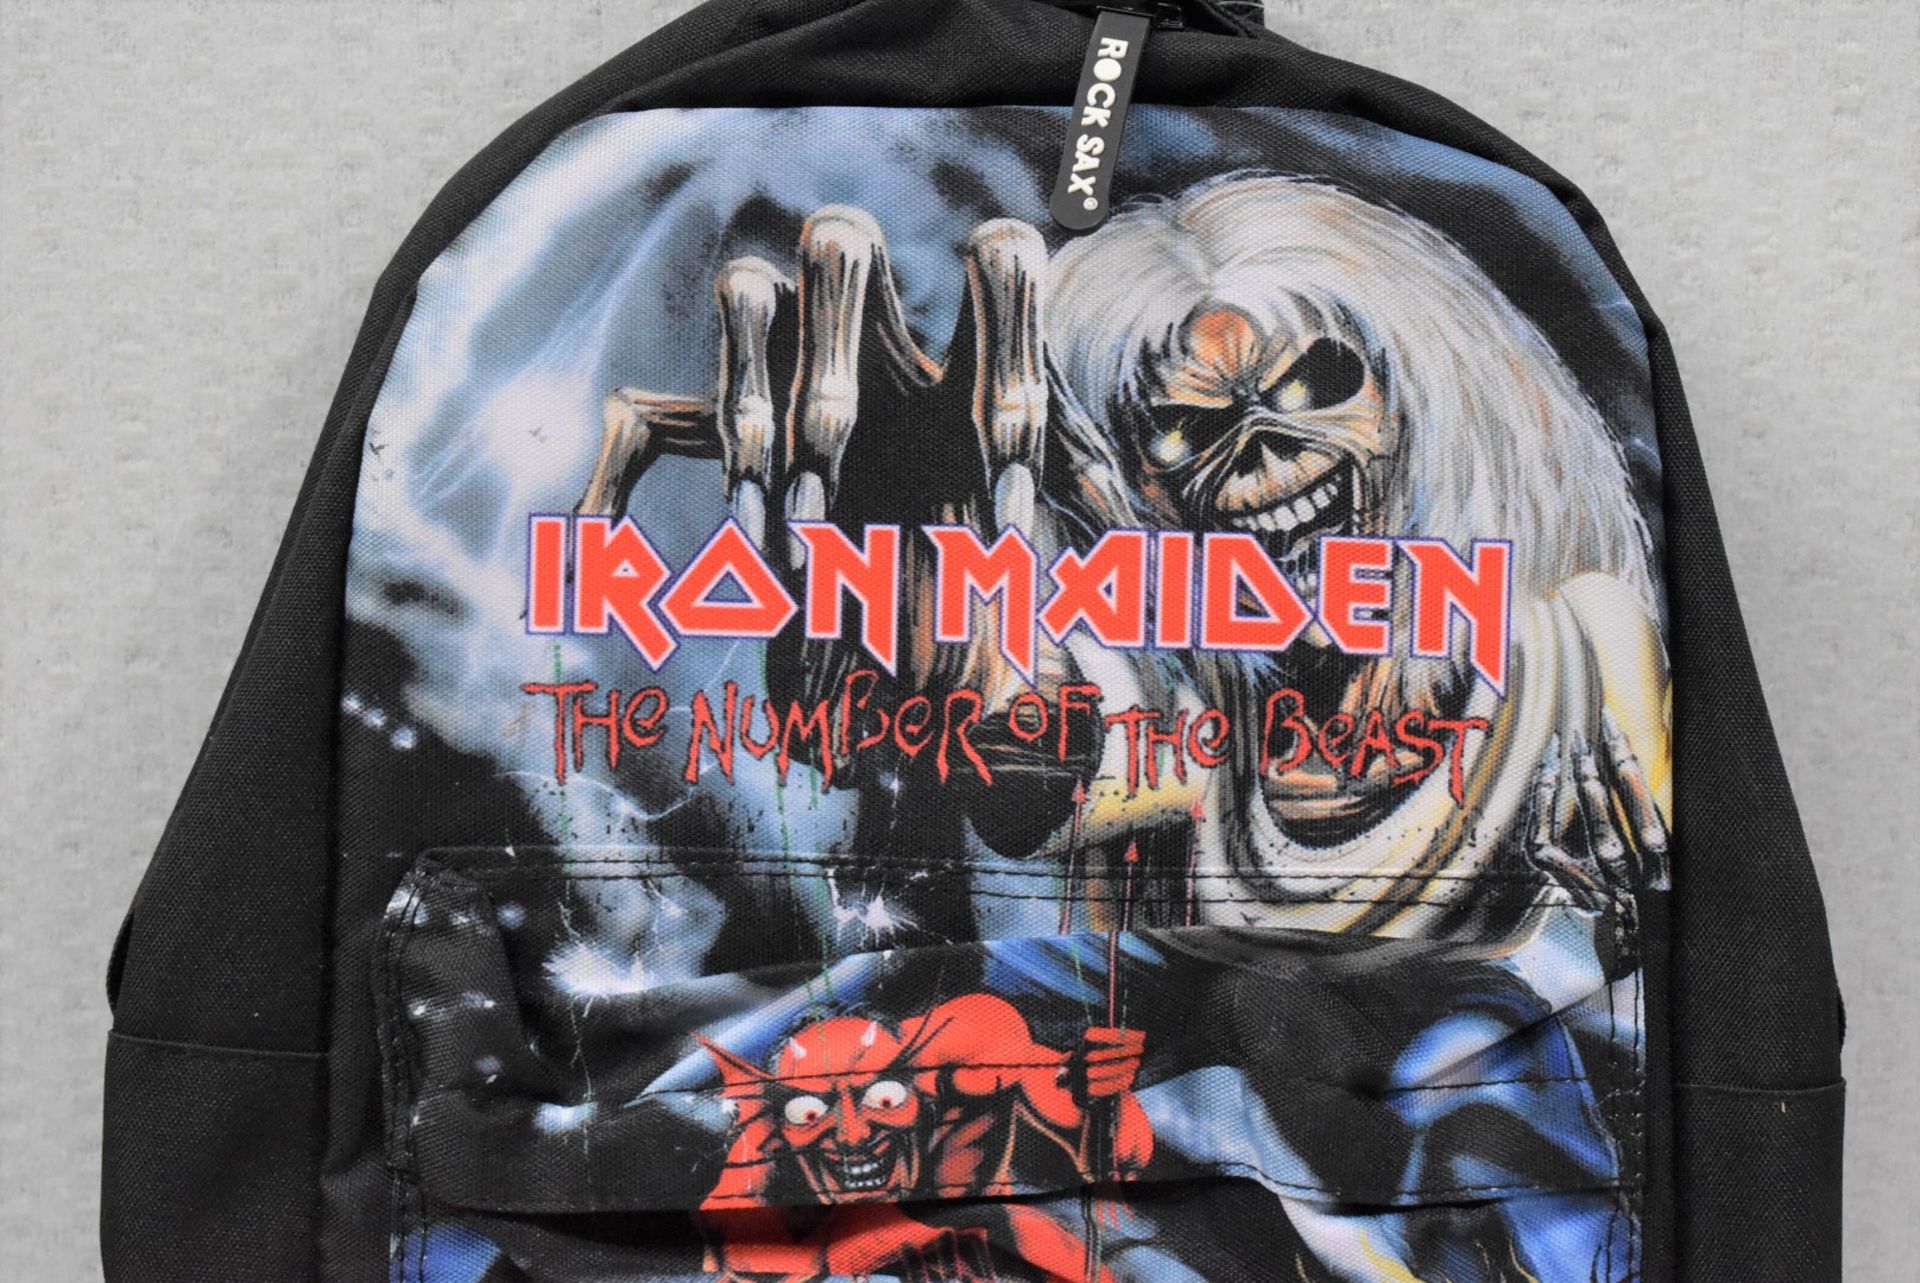 1 x Iron Maiden Number Of The Beast Backpack Bag by Rock Sax - Officially Licensed Merchandise - - Image 3 of 5